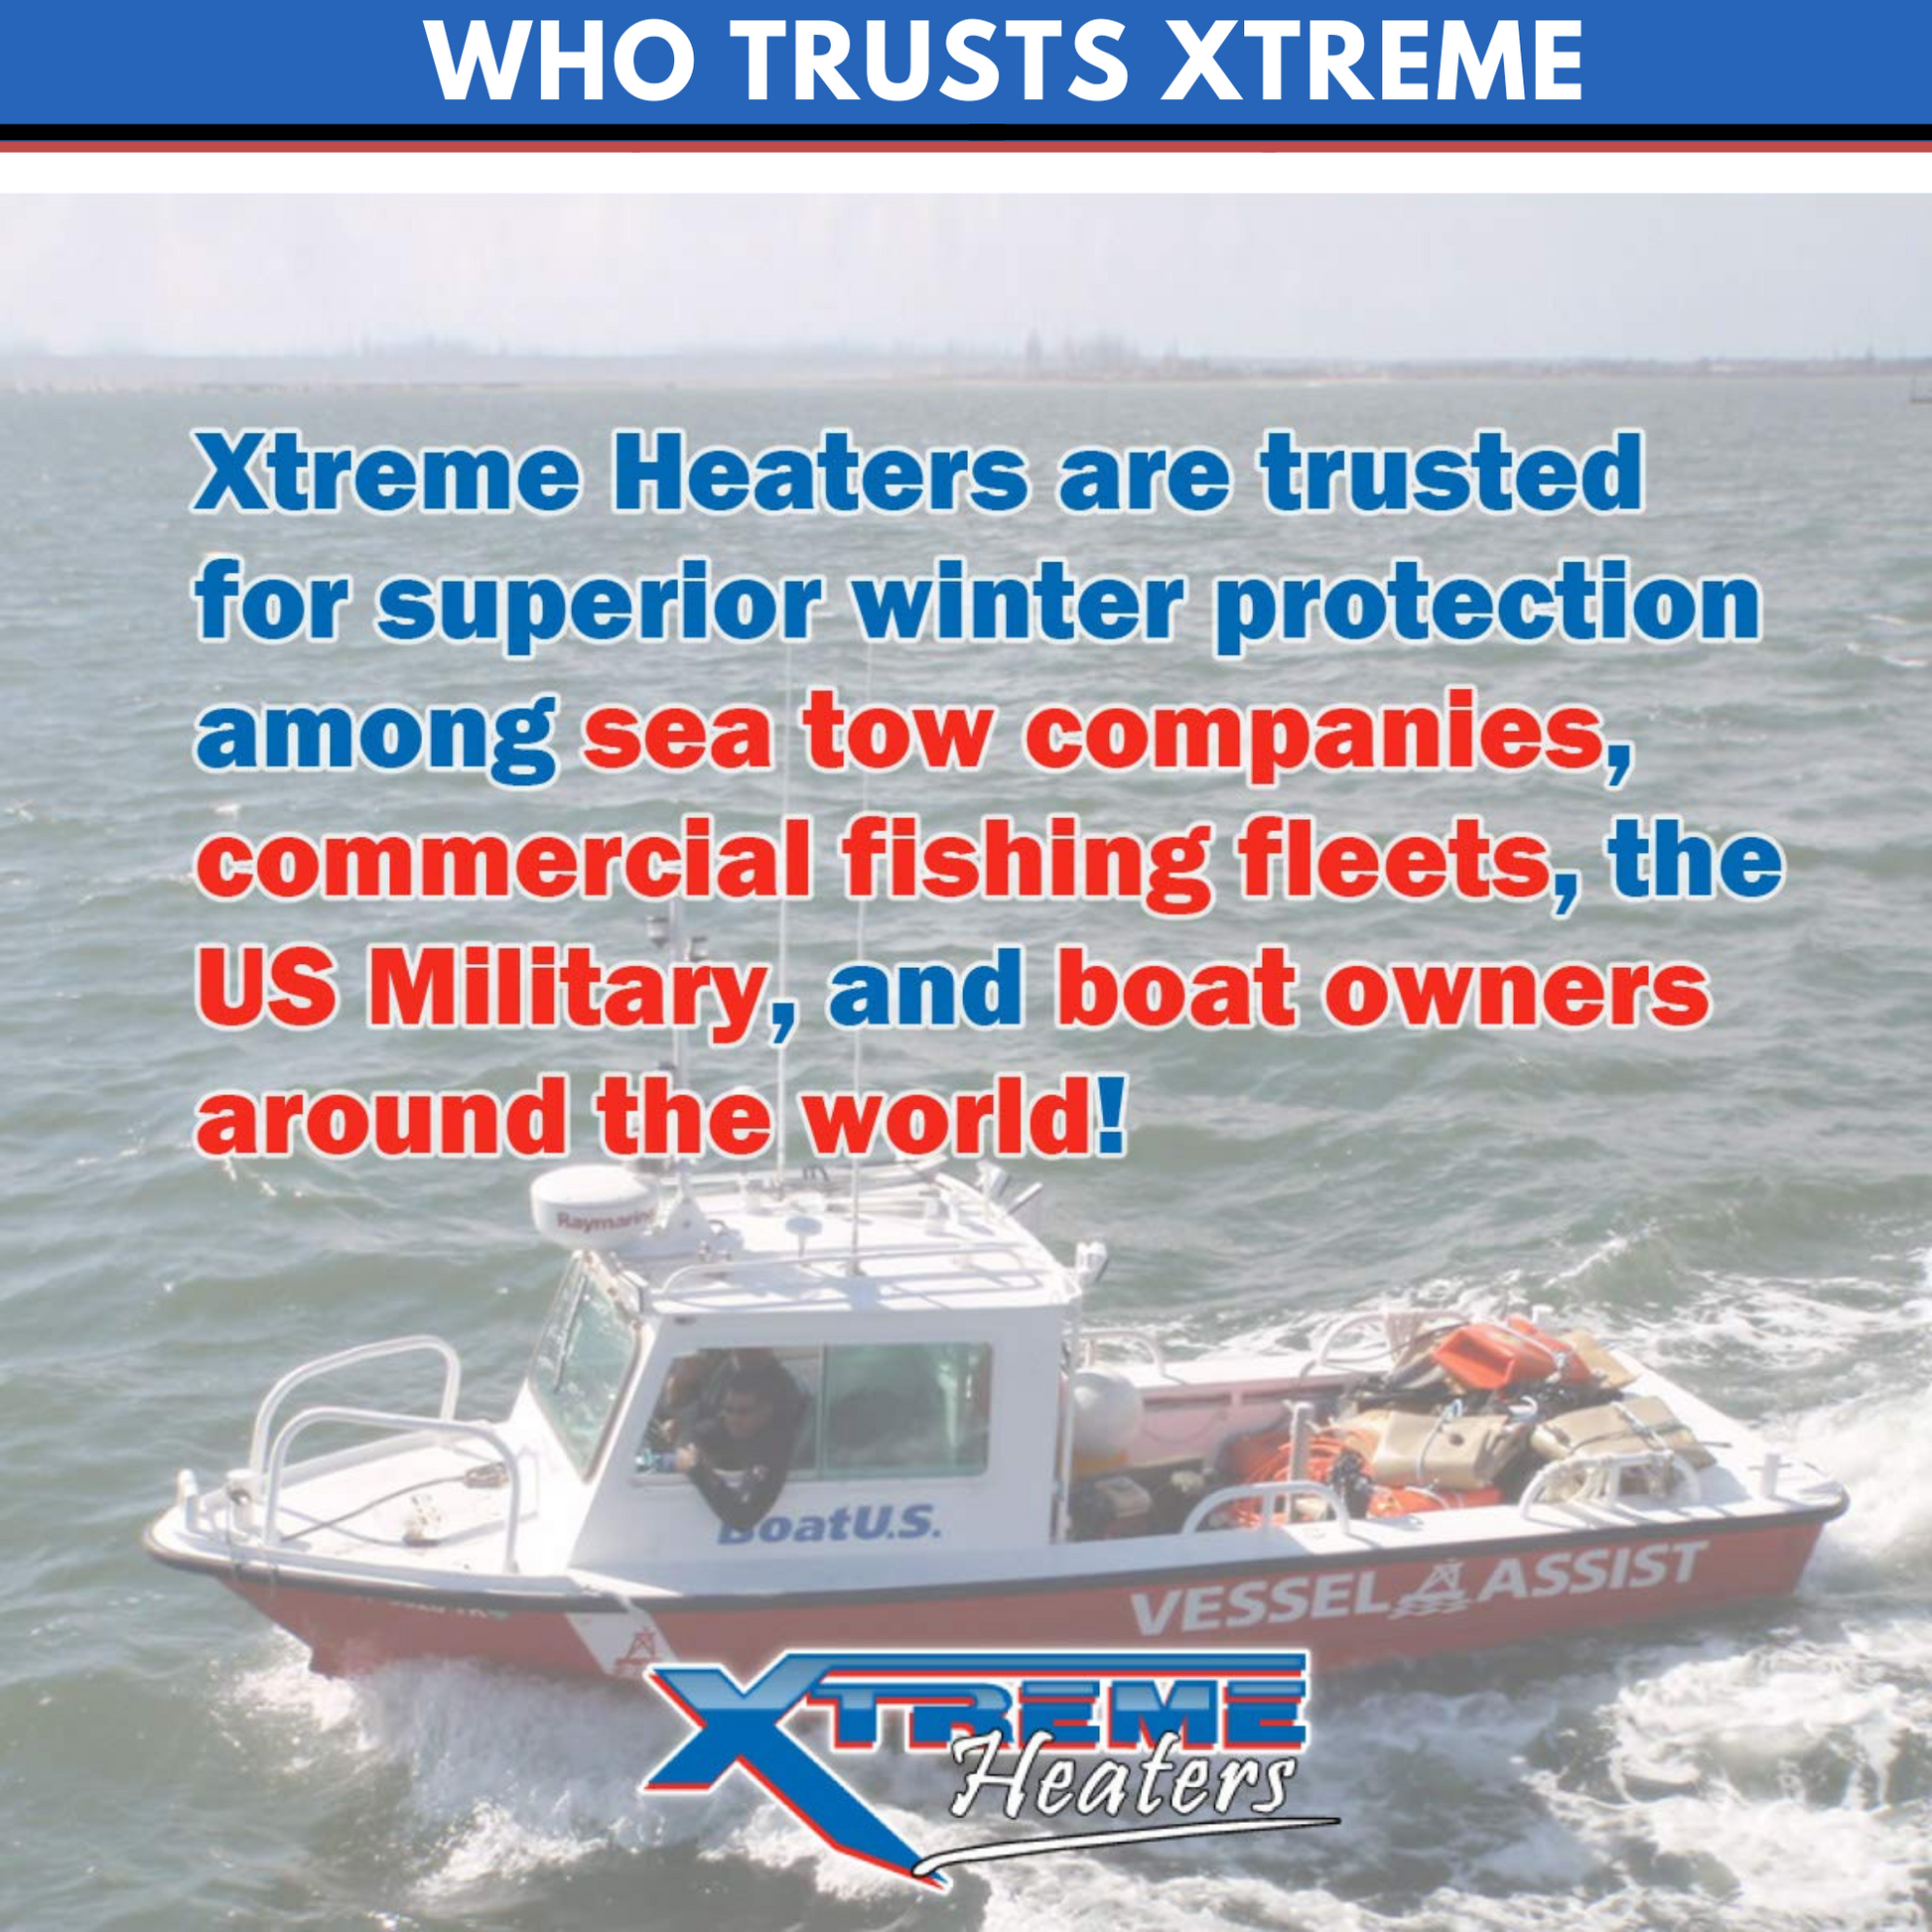 Vessel Assist / TowBoat US uses Xtreme Heaters